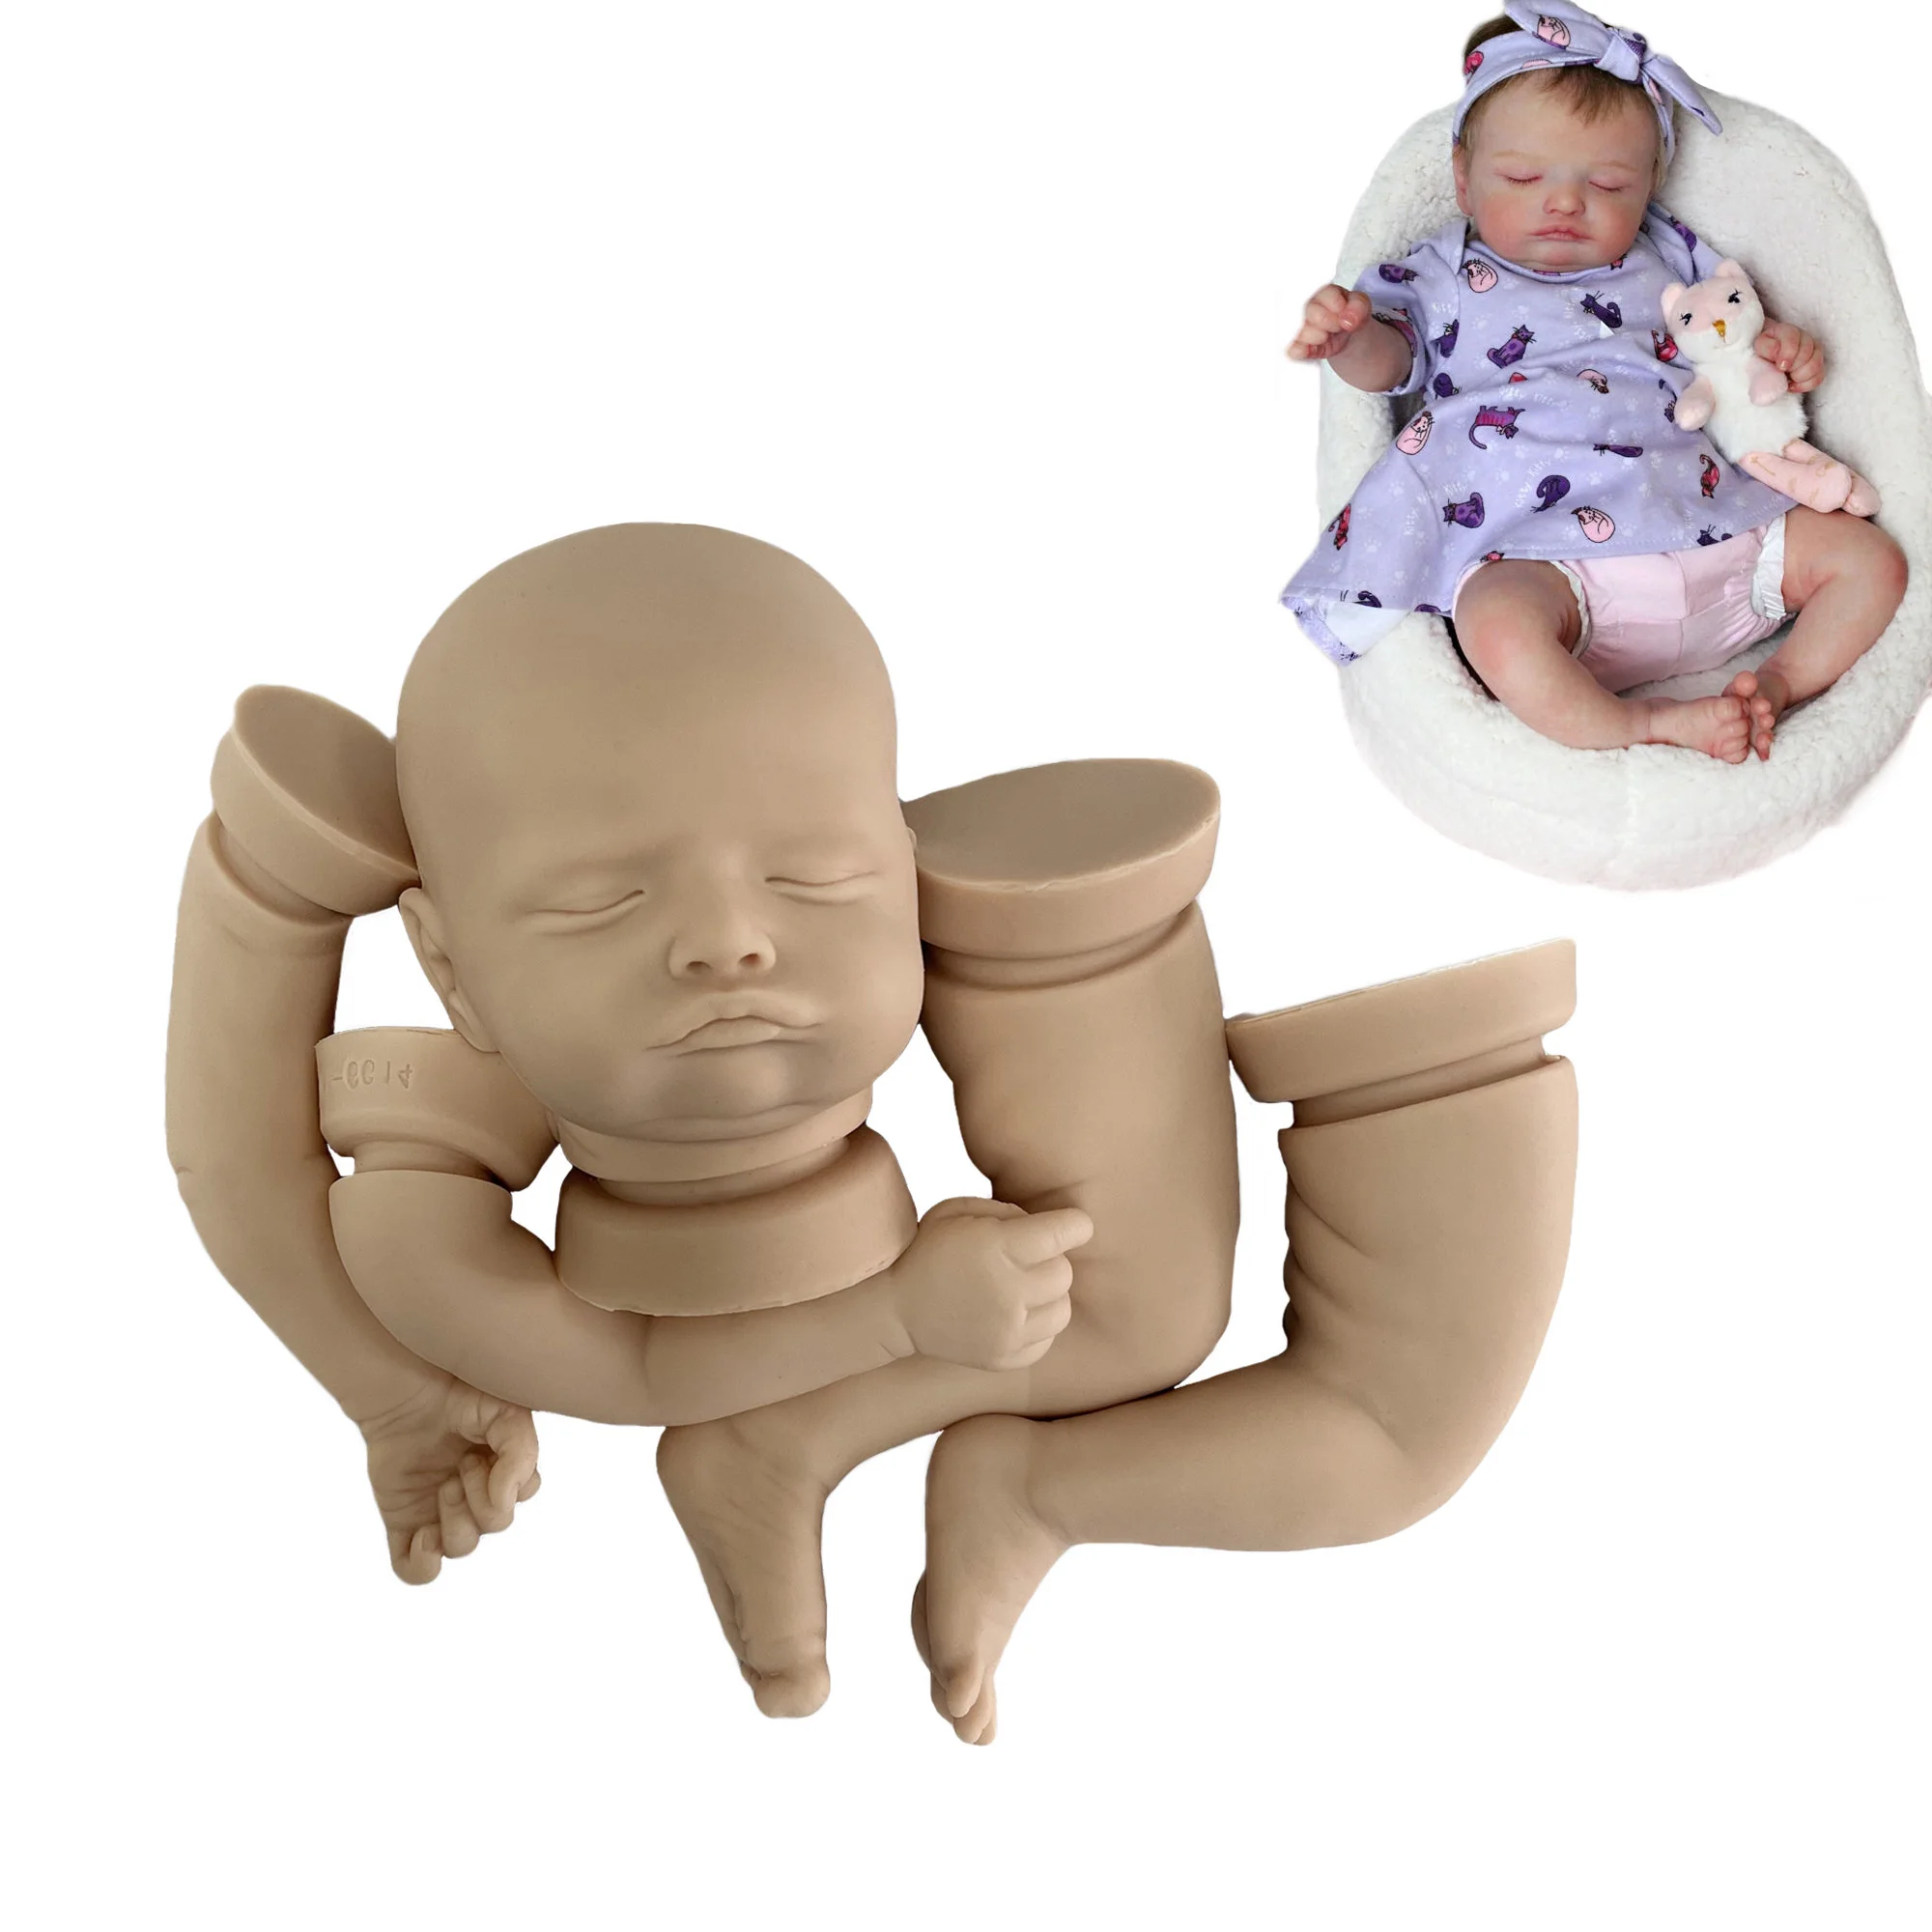 

18" Unpainted Lovely Soft Silicone Reborn Doll Kits Include Bodies Handmade DIY Unfinished Solid Silicone Bebe Reborn Doll Kits